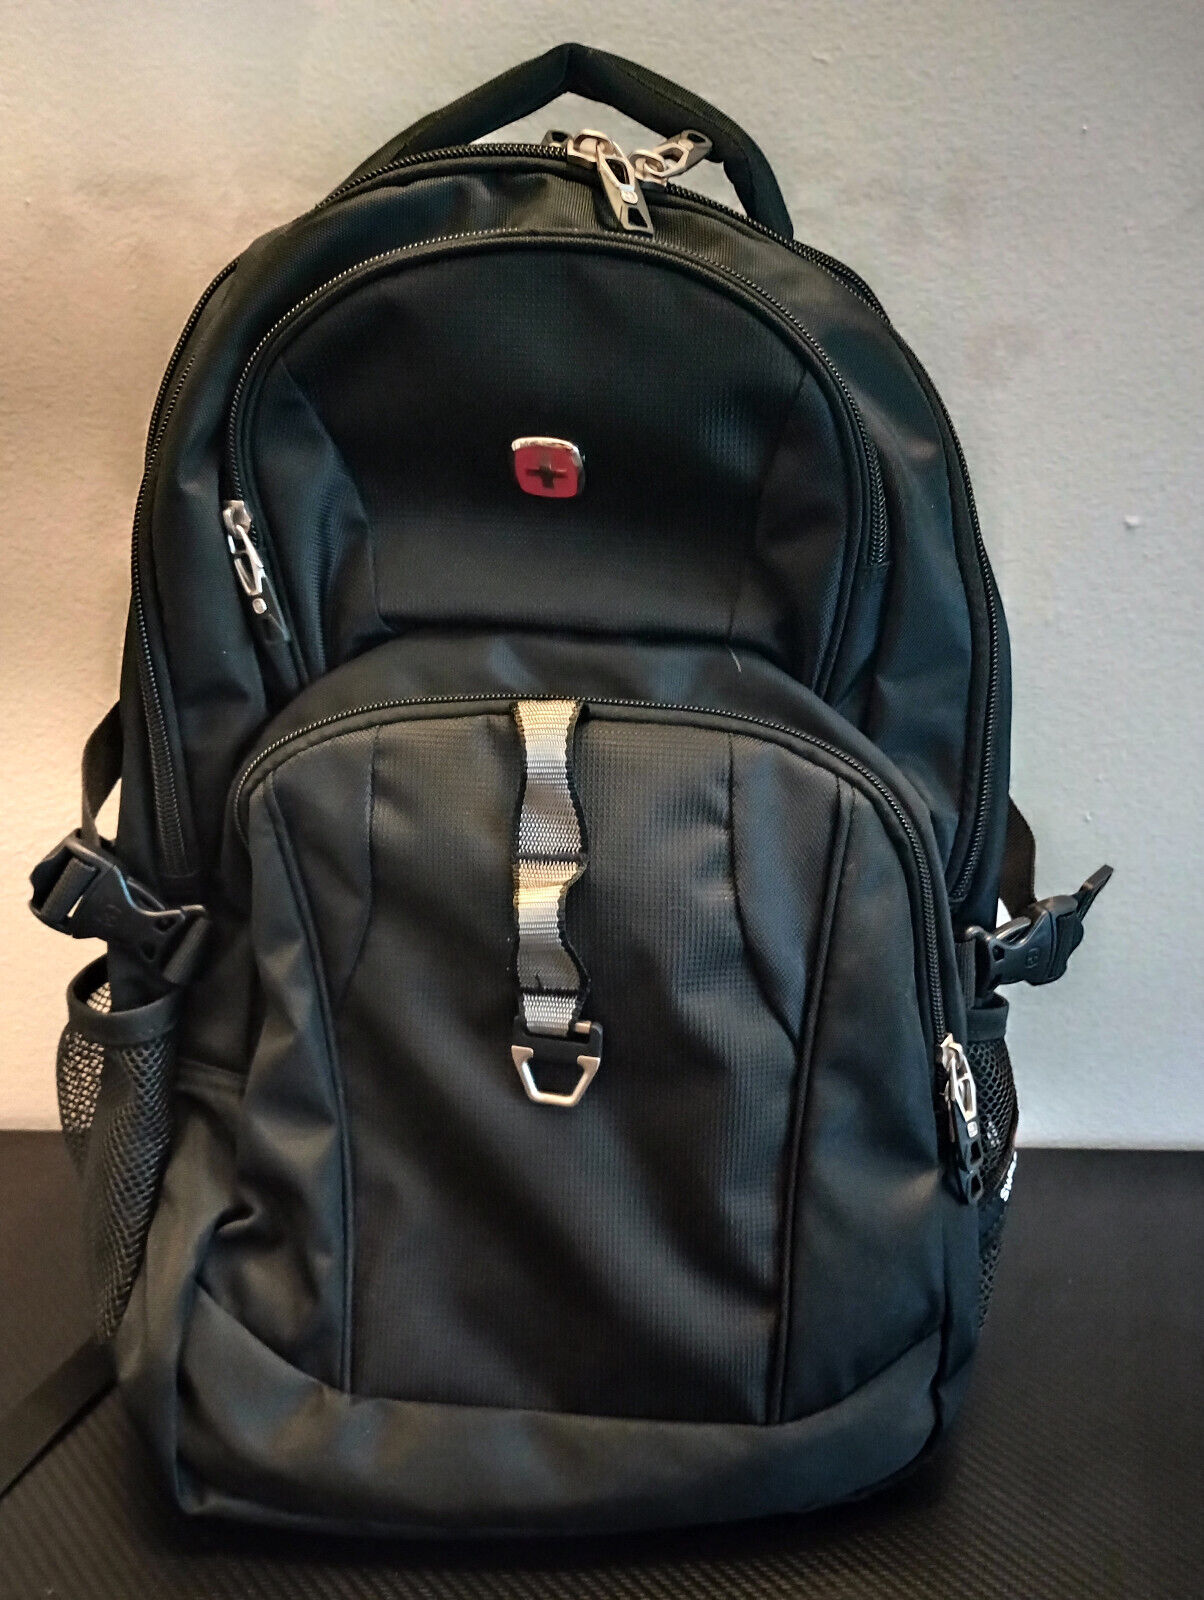 Wenger Swiss Gear  Backpack with Laptop Section Black - New w/o Tags